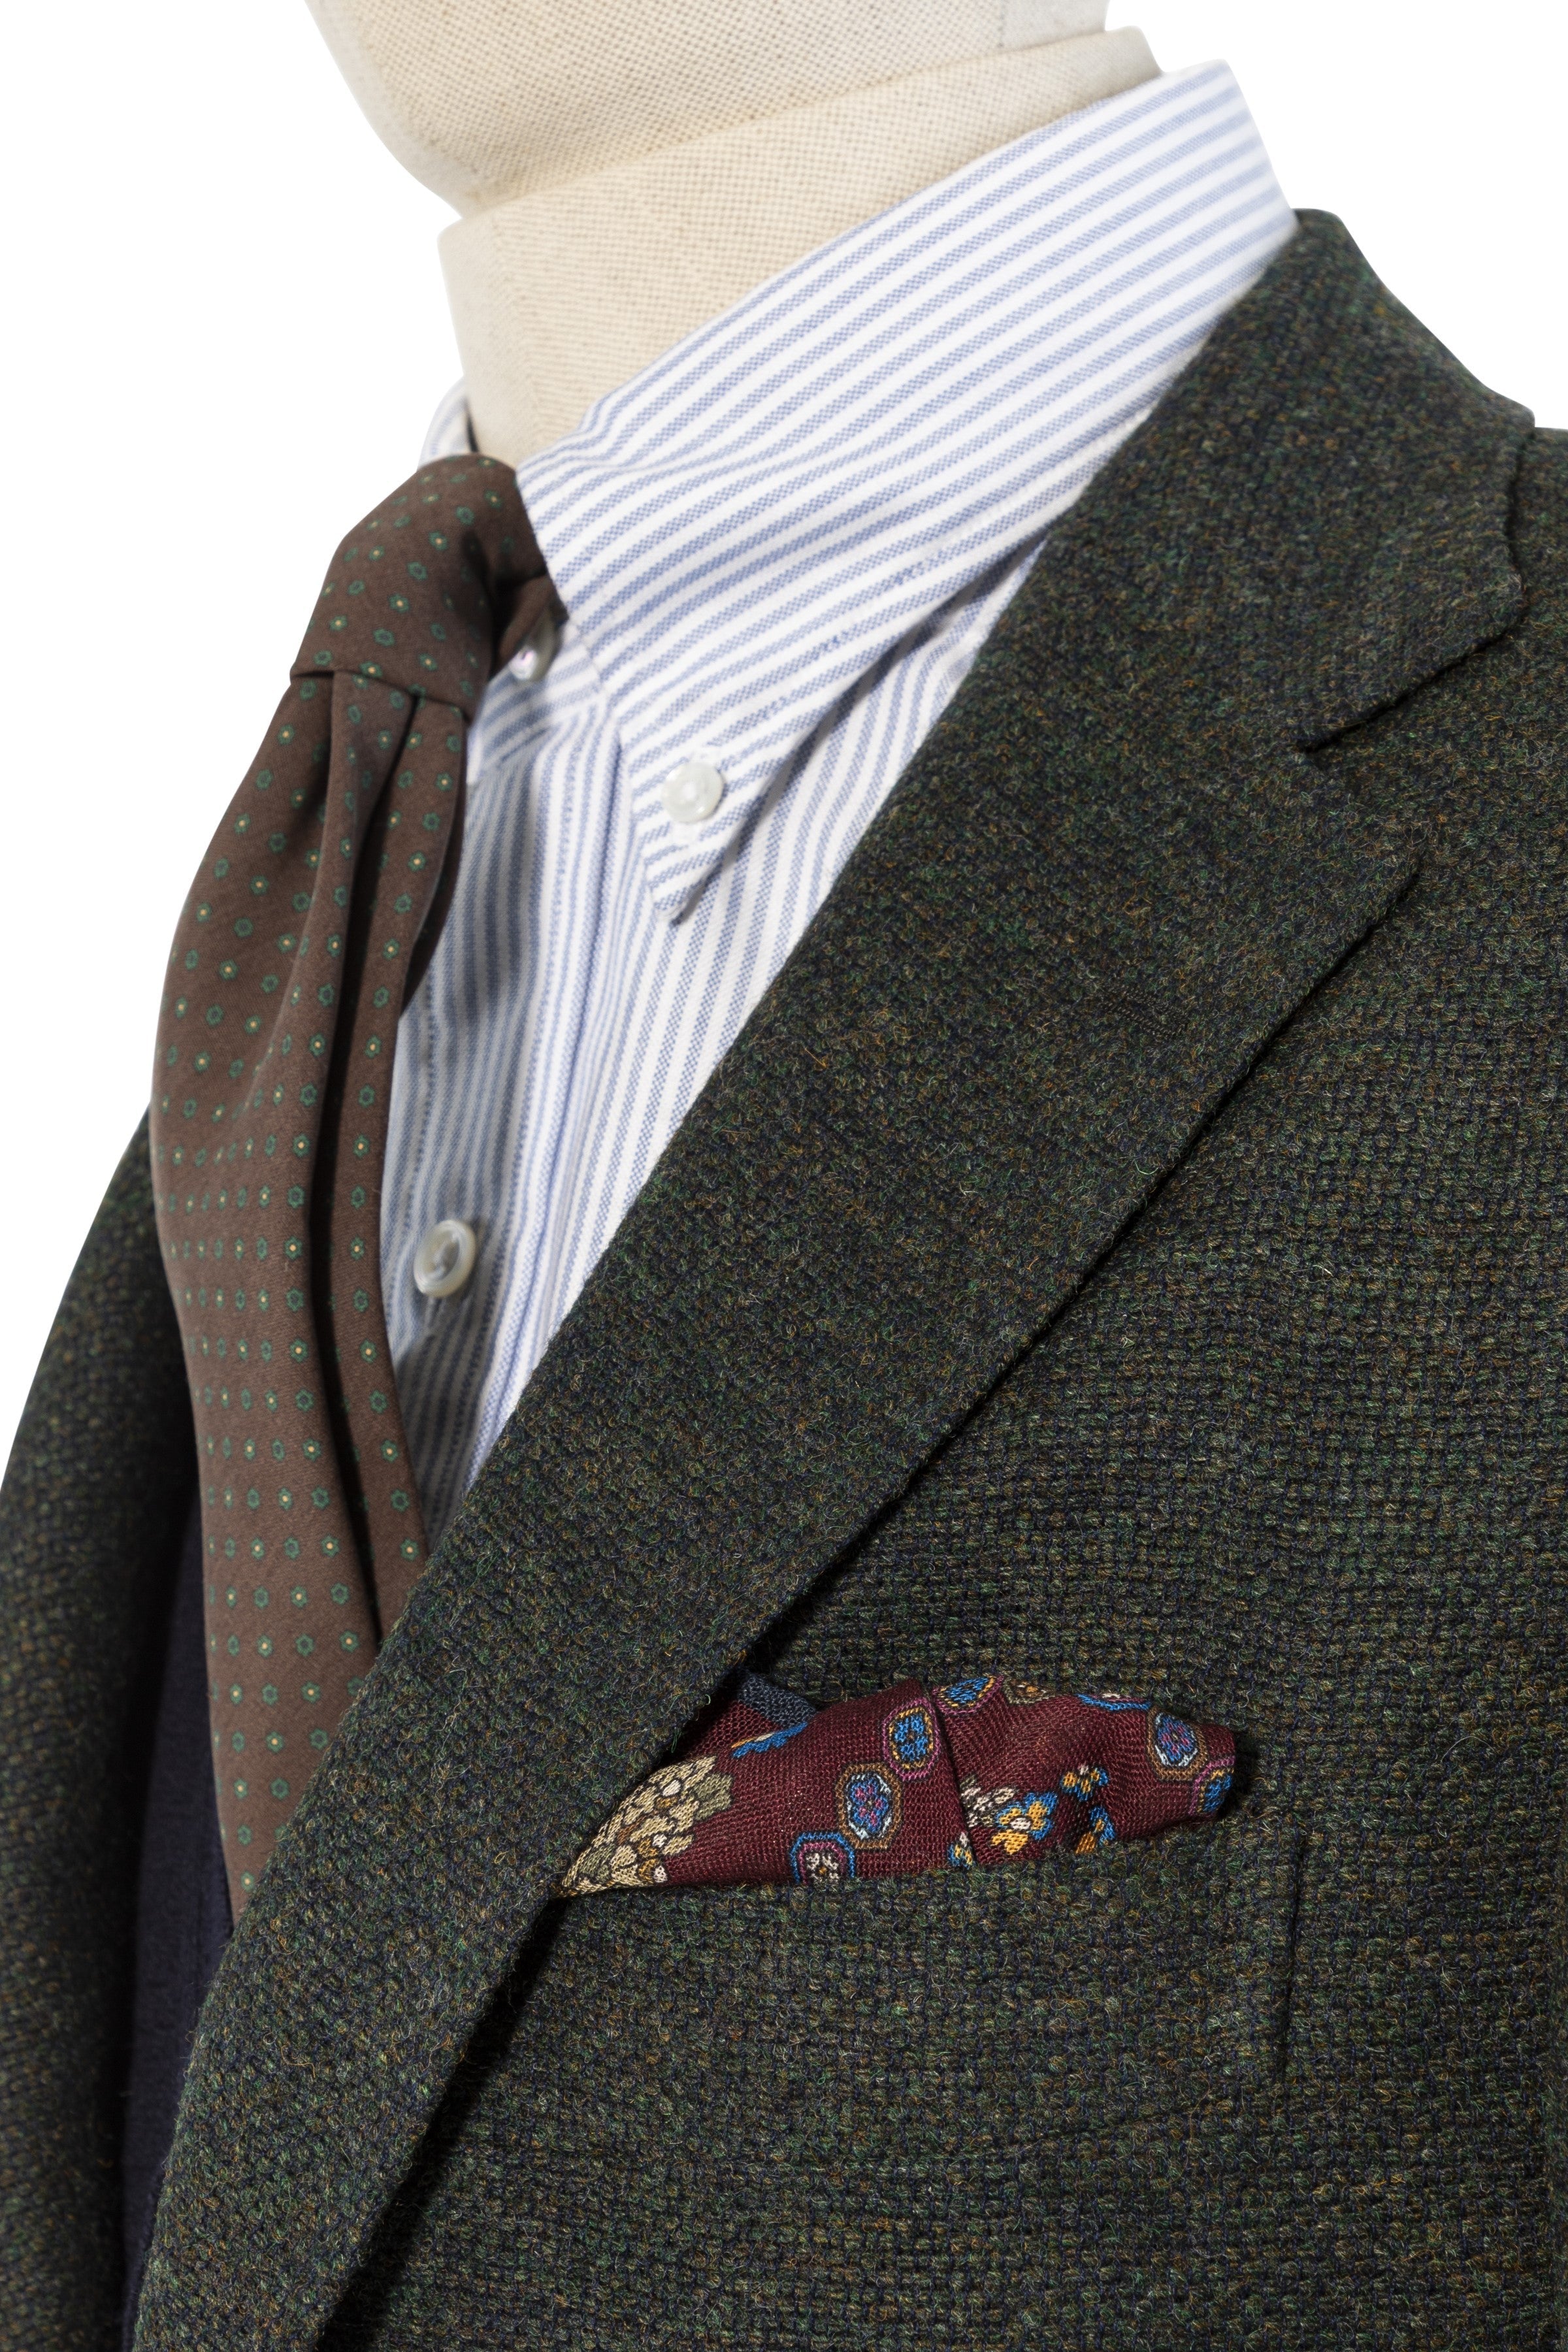 The Armoury by Ring Jacket Model 3 Olive Di Pray Leno Weave Shetland Wool Sport Coat